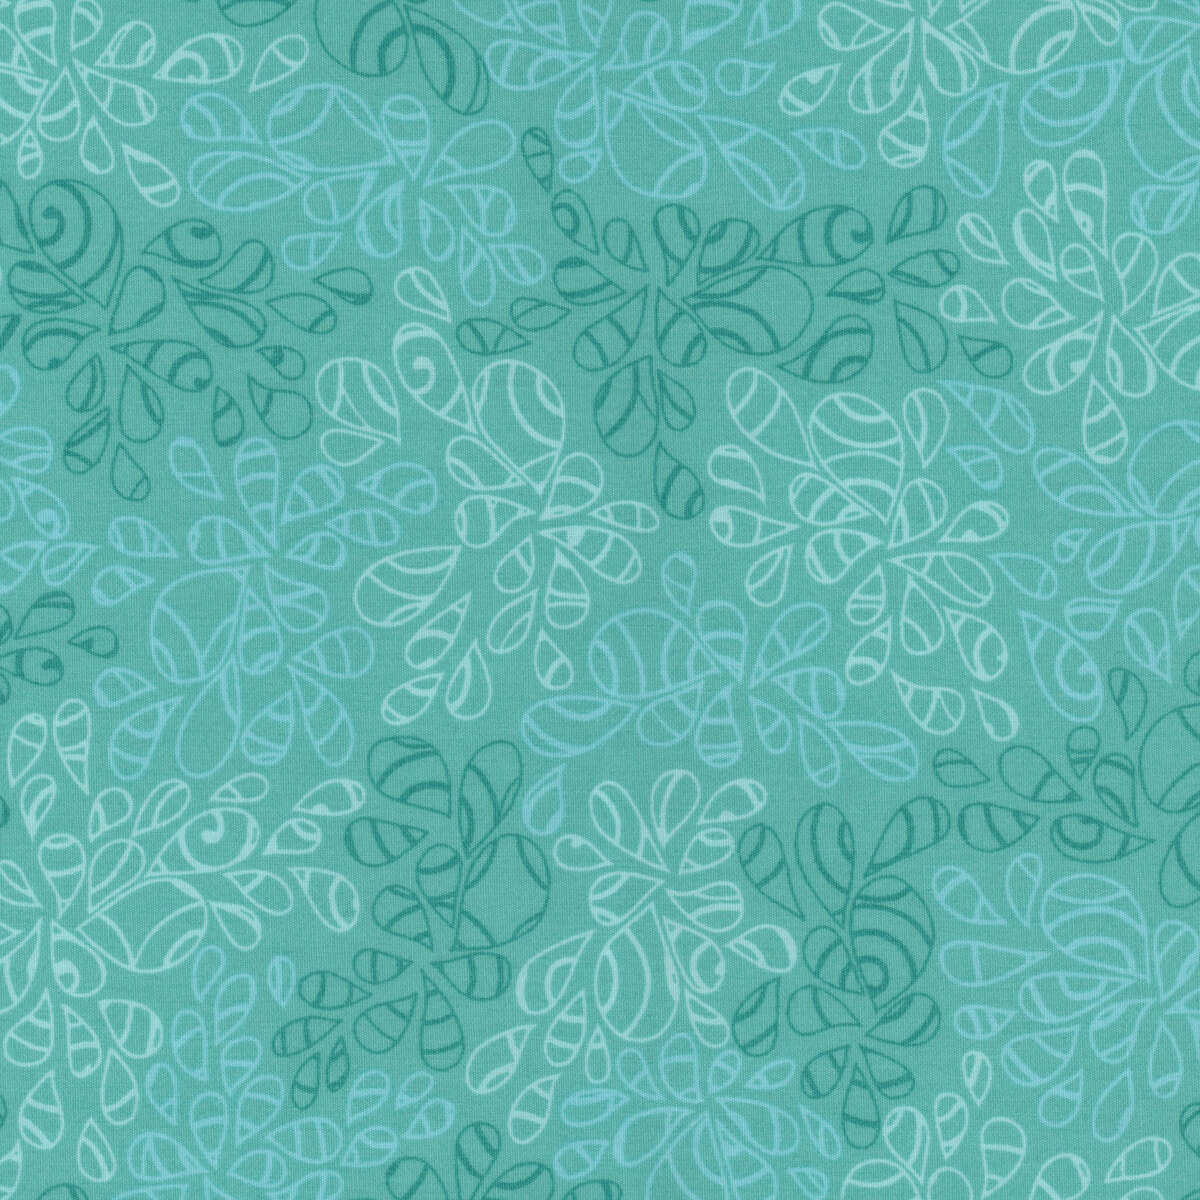 100+] Mint Green Aesthetic Wallpapers